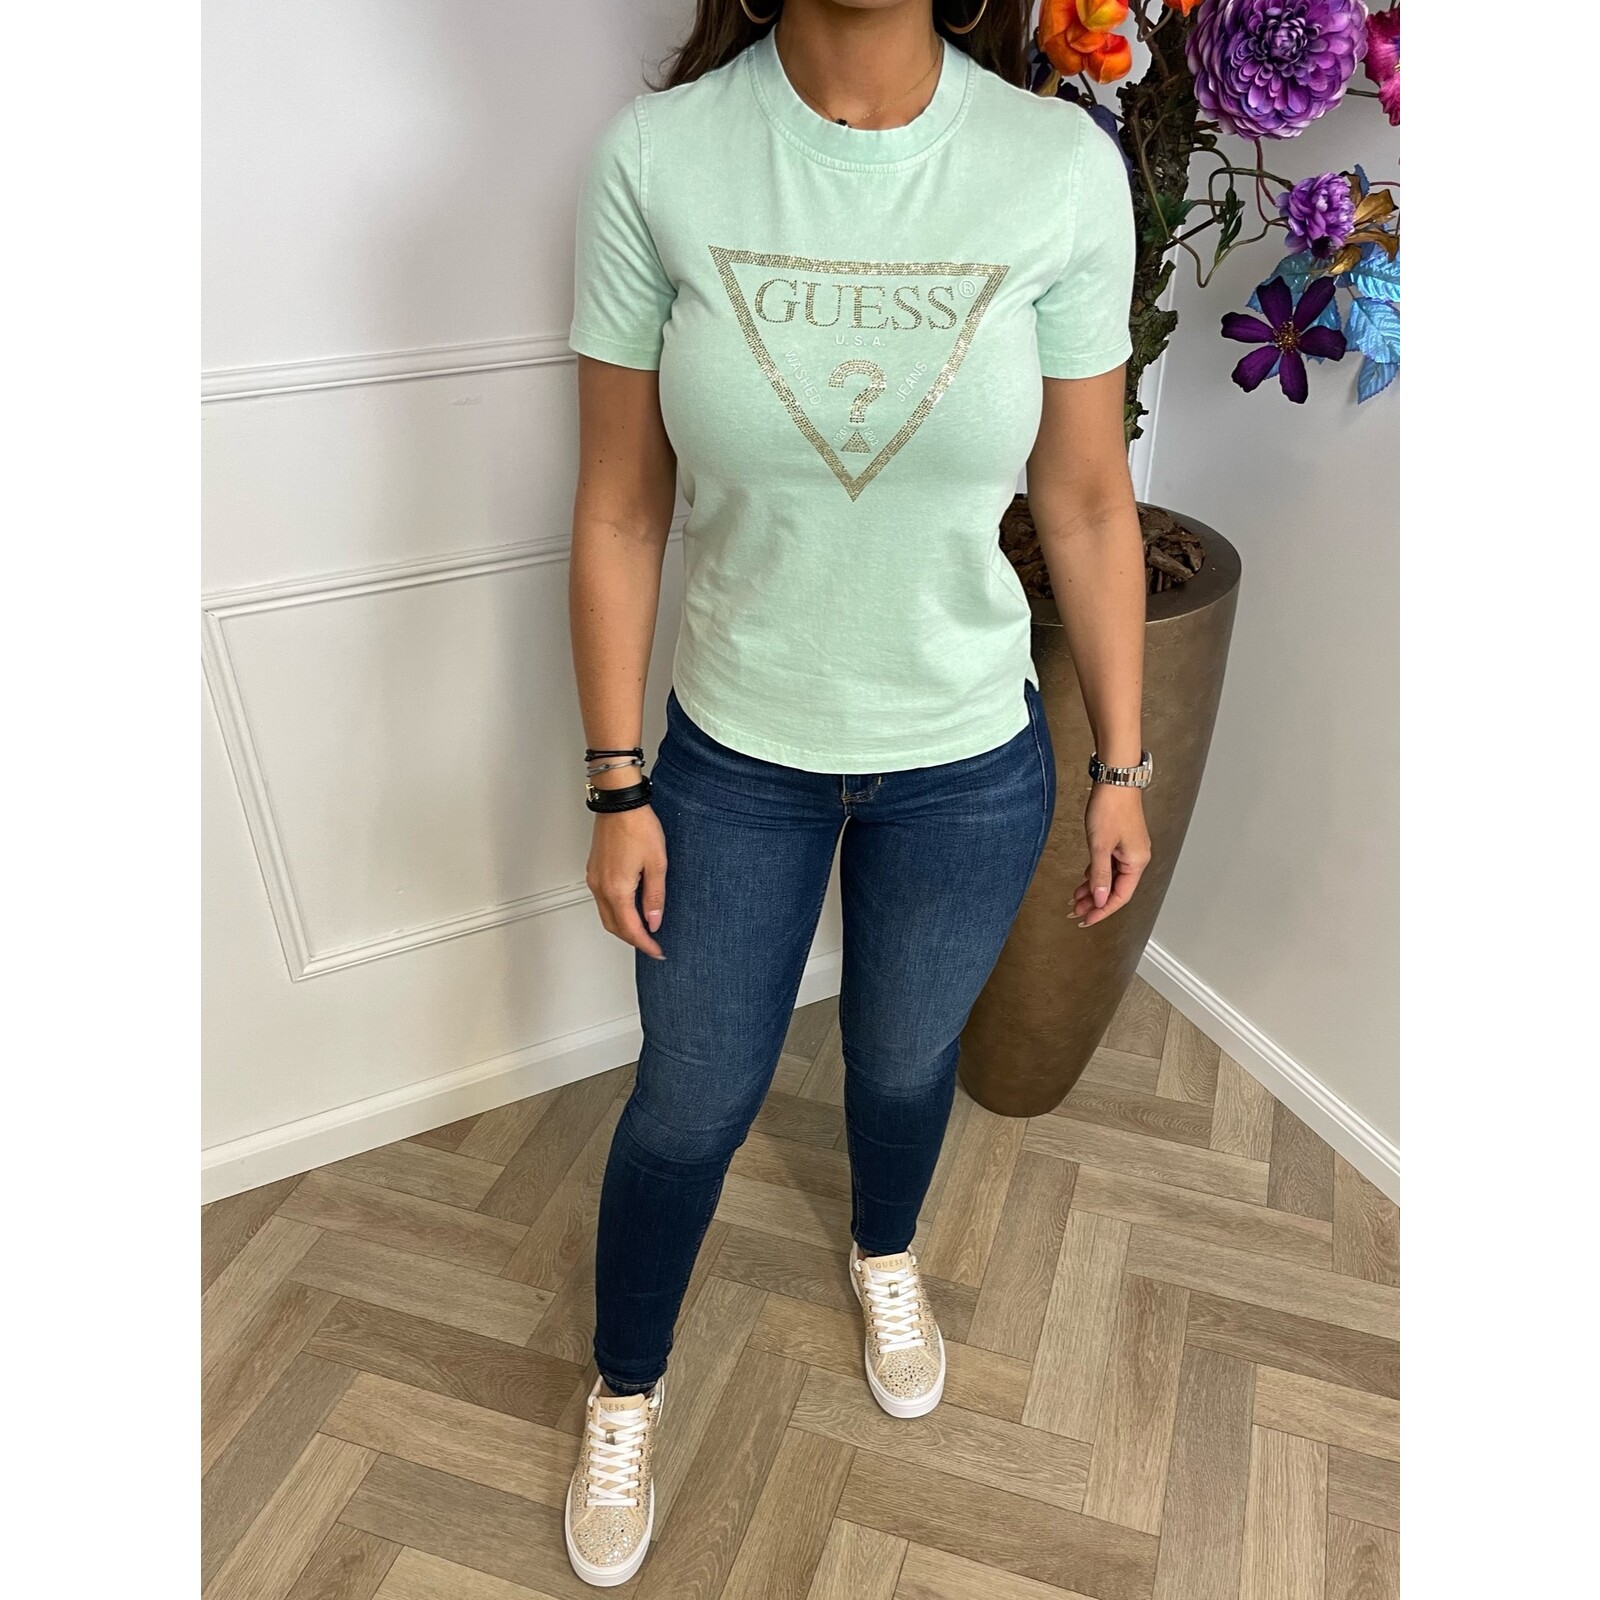 Guess T-shirt Gold Triangle Mint Guess 769